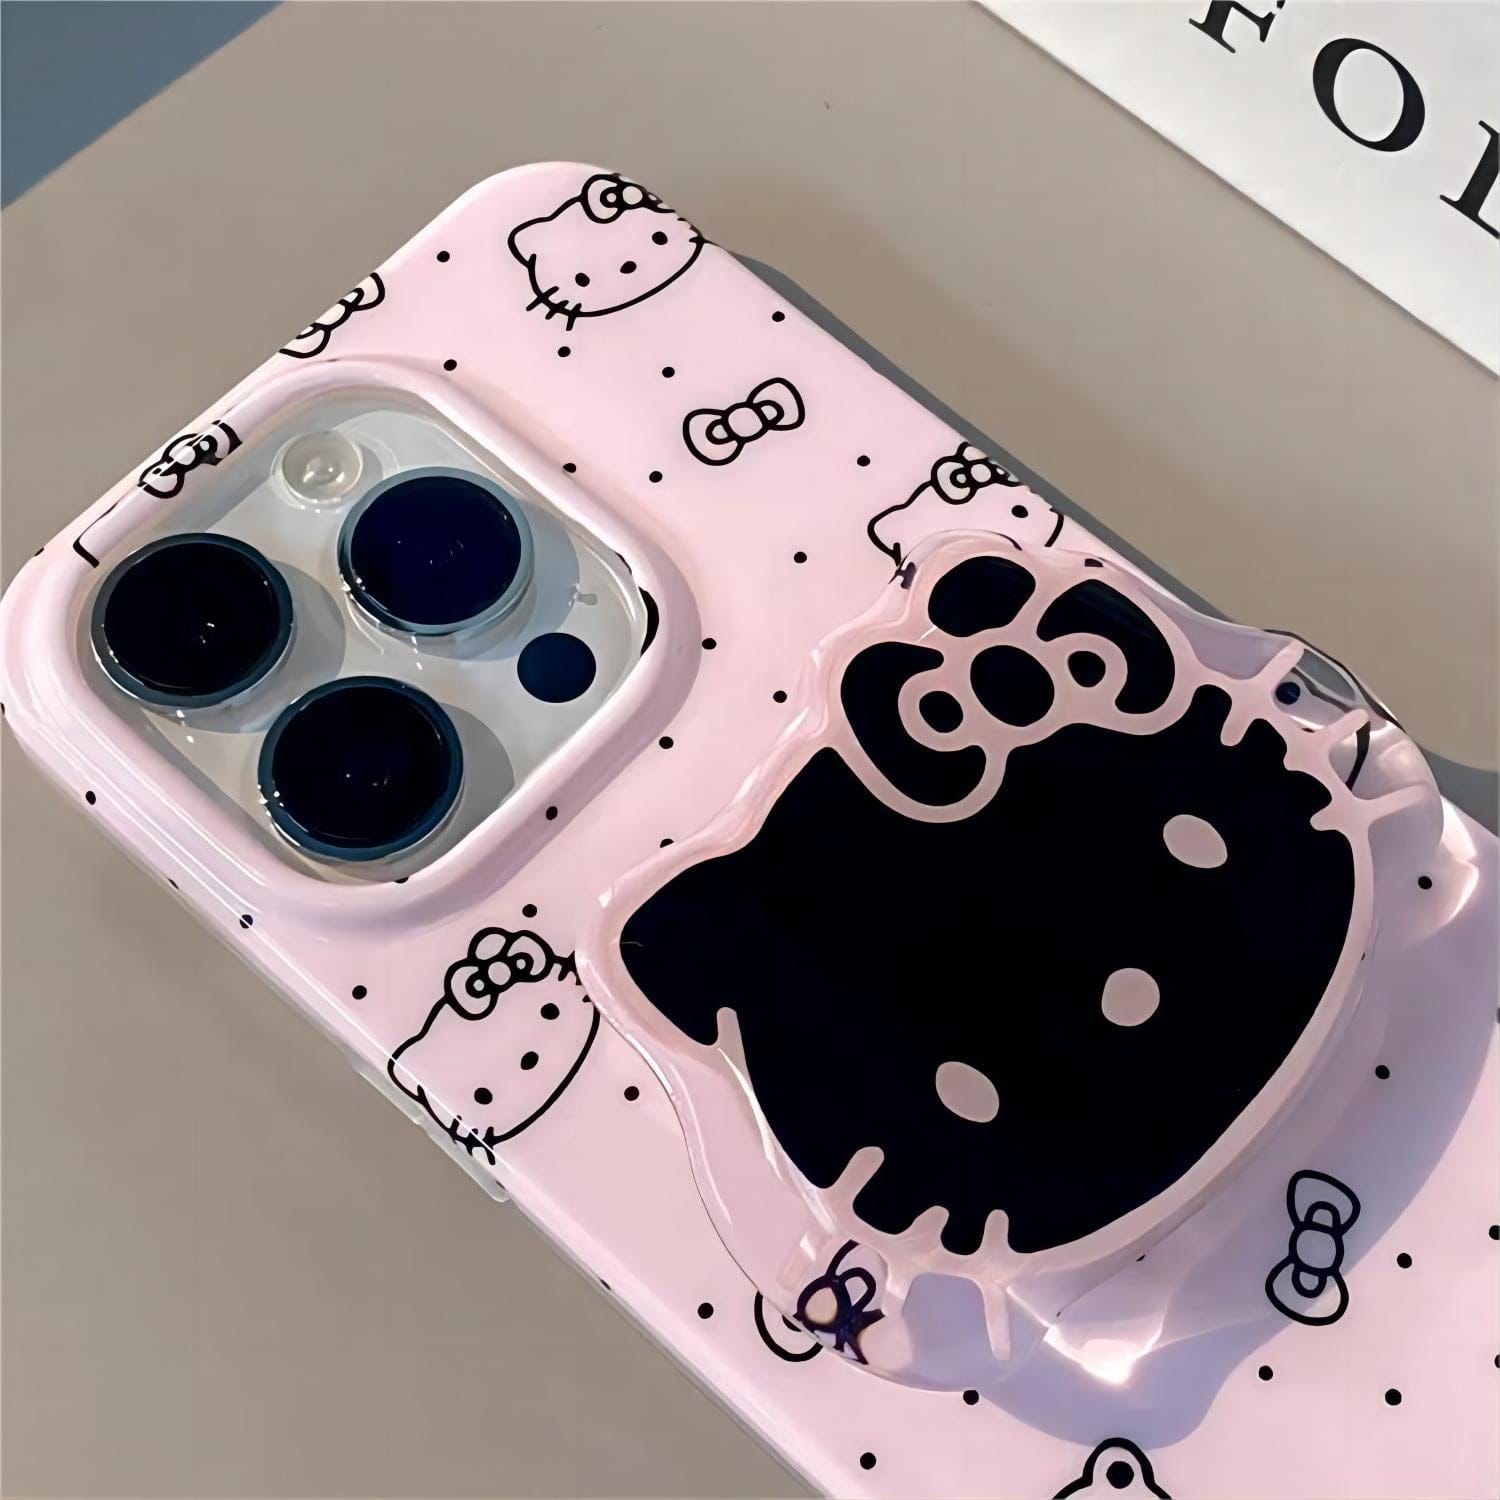 Sanrio Hello Kitty iPhone Case With Stand